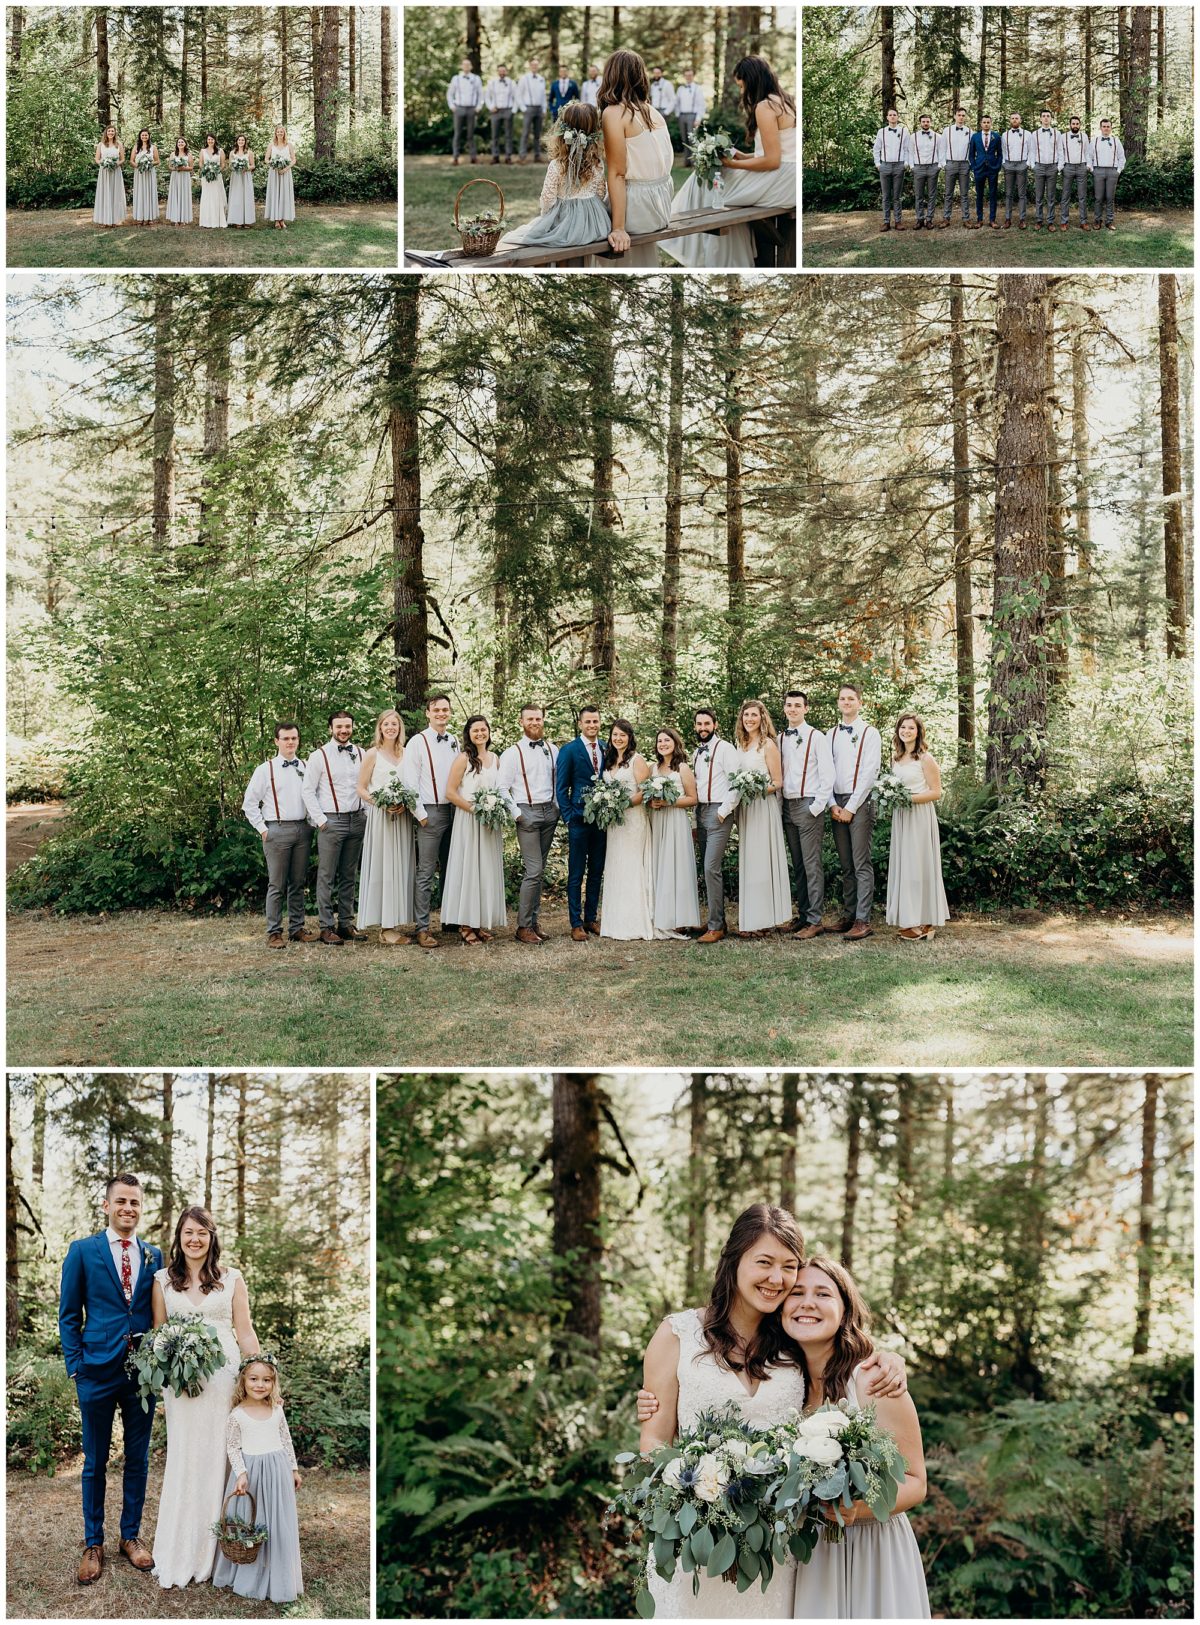 A beautiful wedding party in the woods. Photography by Portland Wedding photographer, Briana Morrison